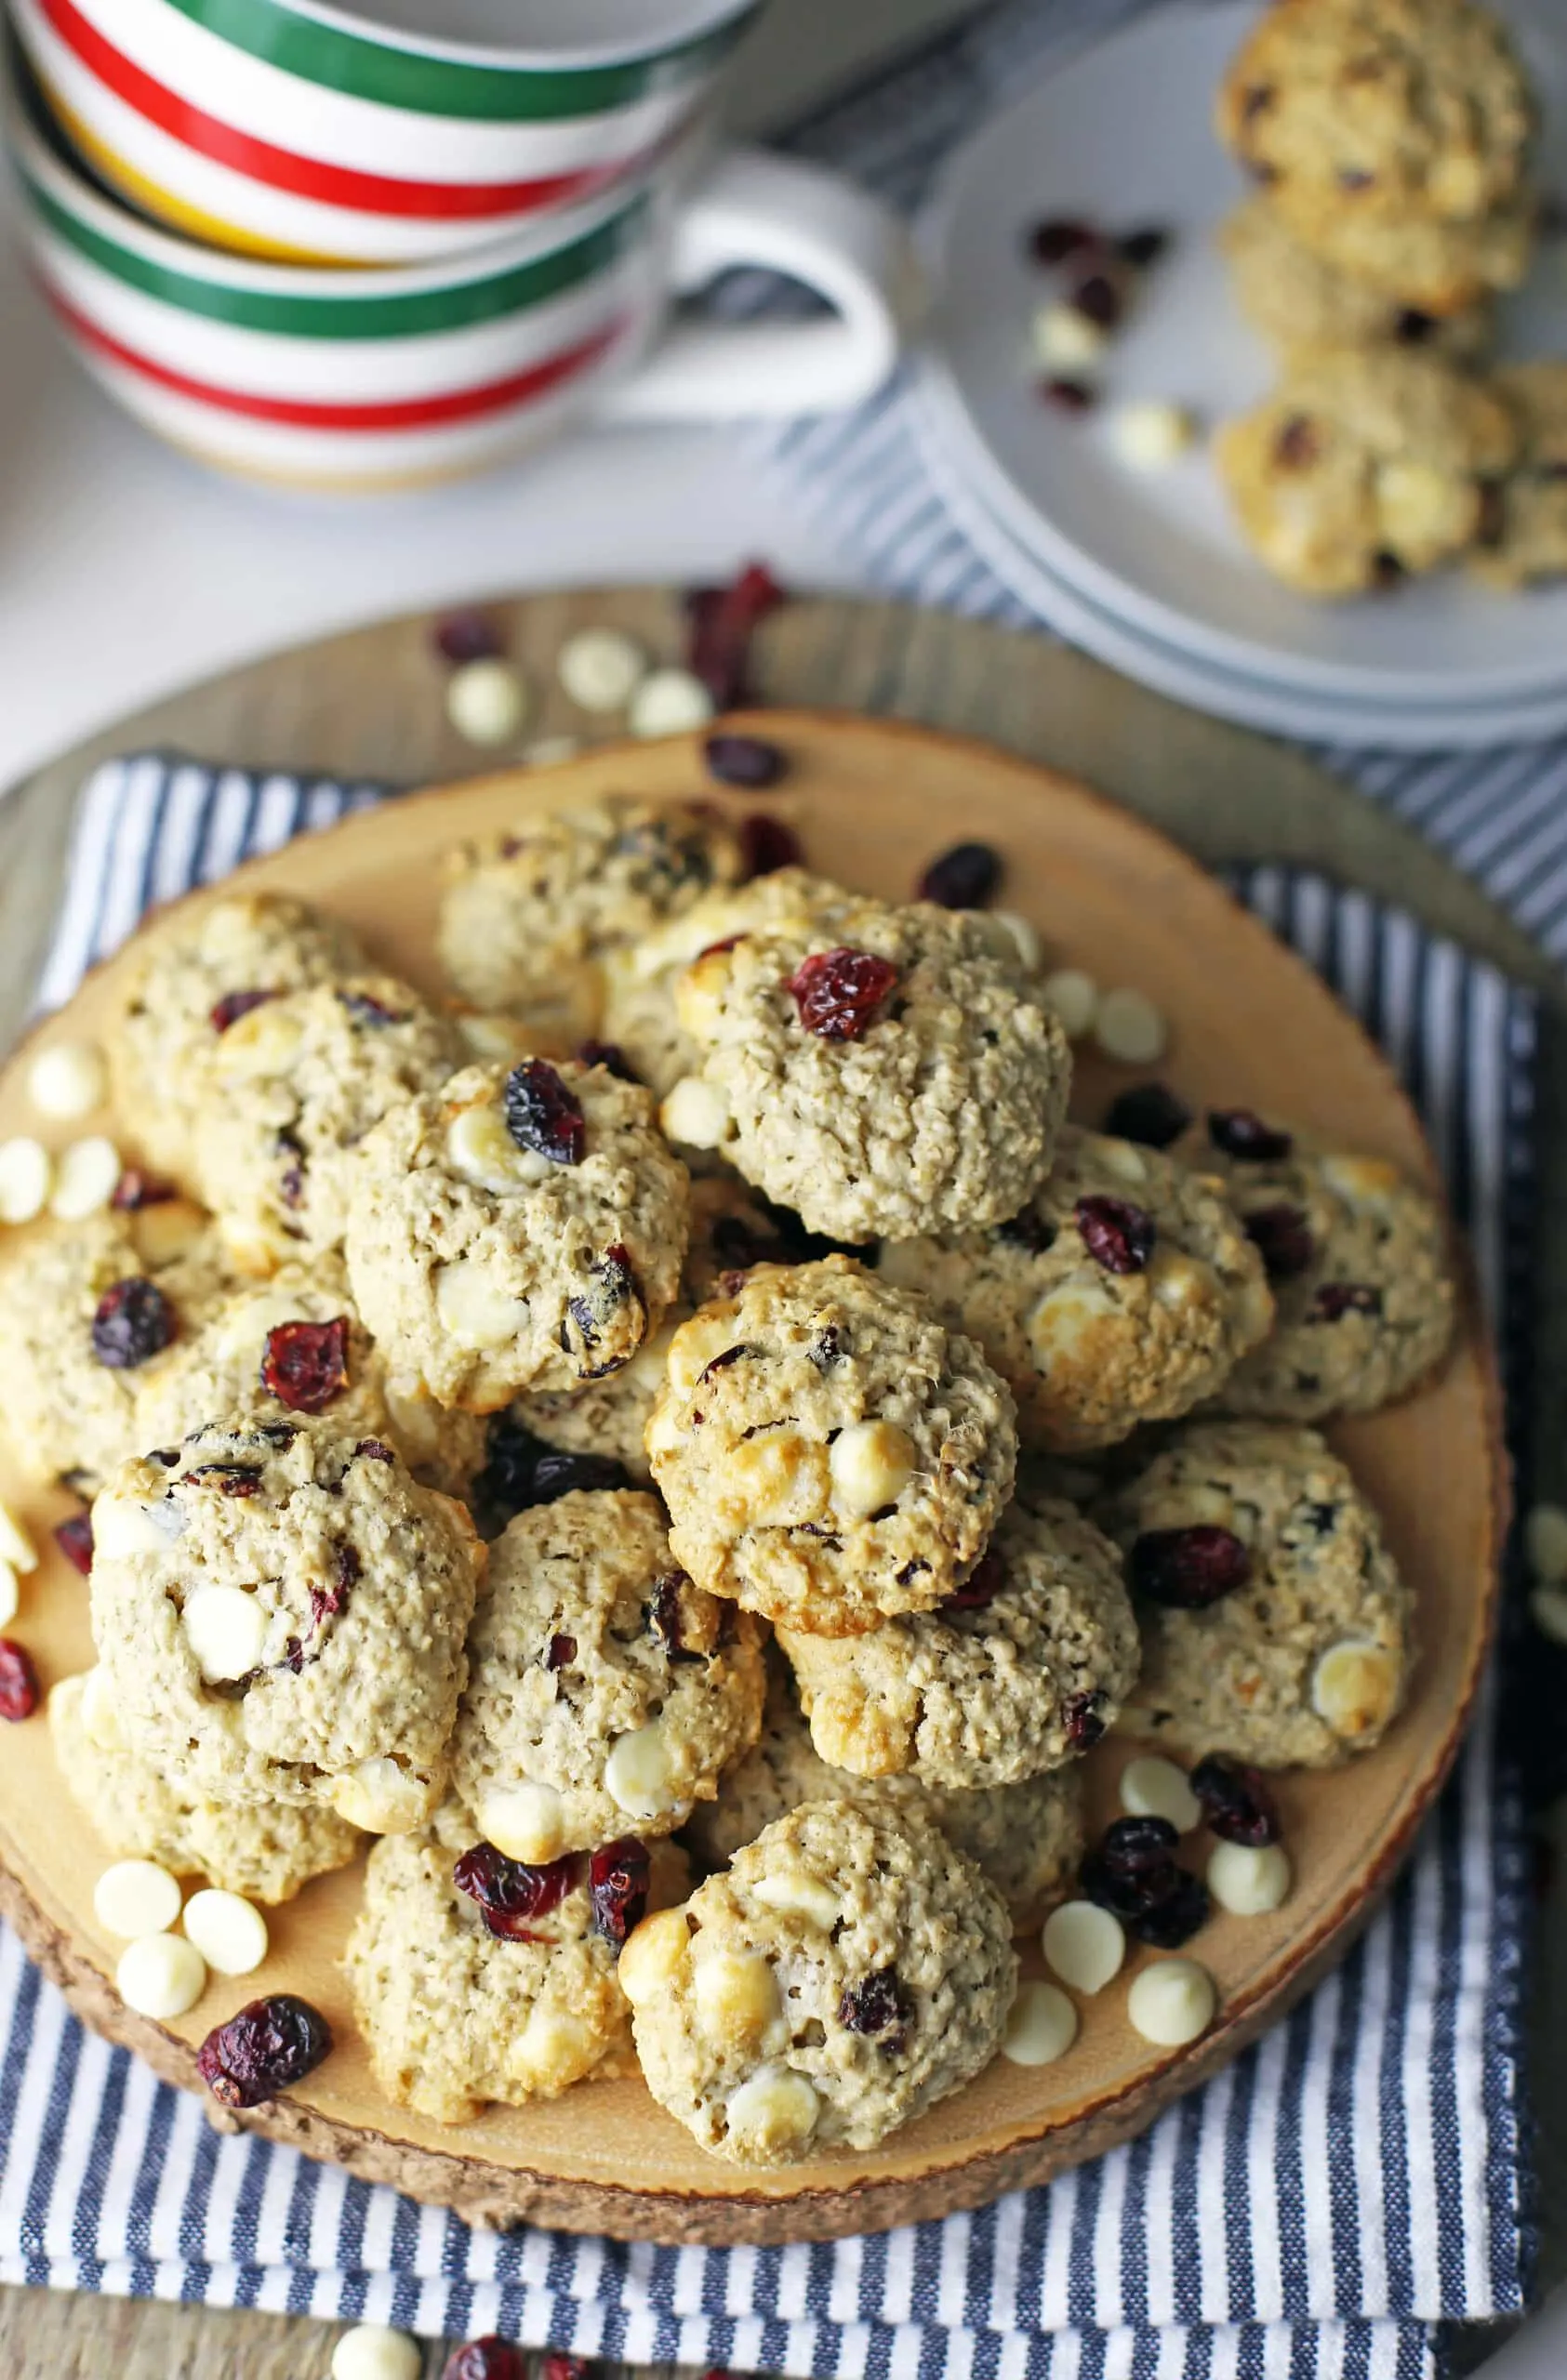 Overhead view of a round wooden platter piled high with white chocolate cranberry oatmeal cookies.